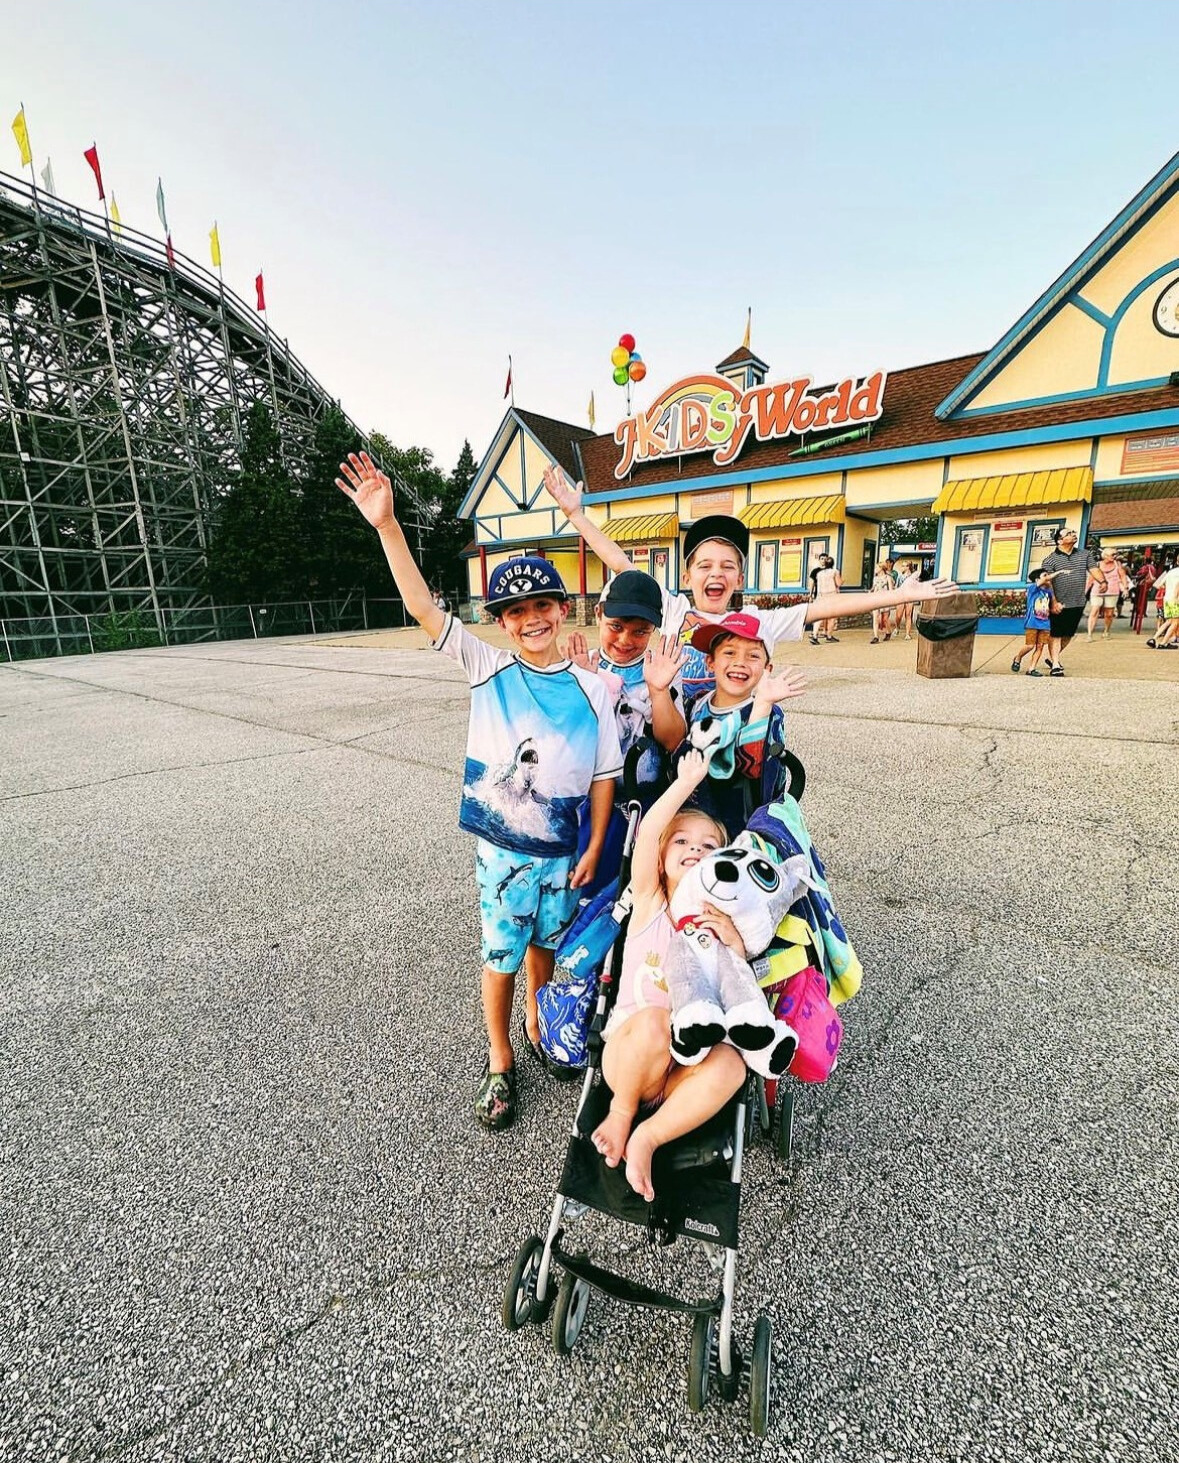 Children take a group photo in front of the Holiday World entrance.